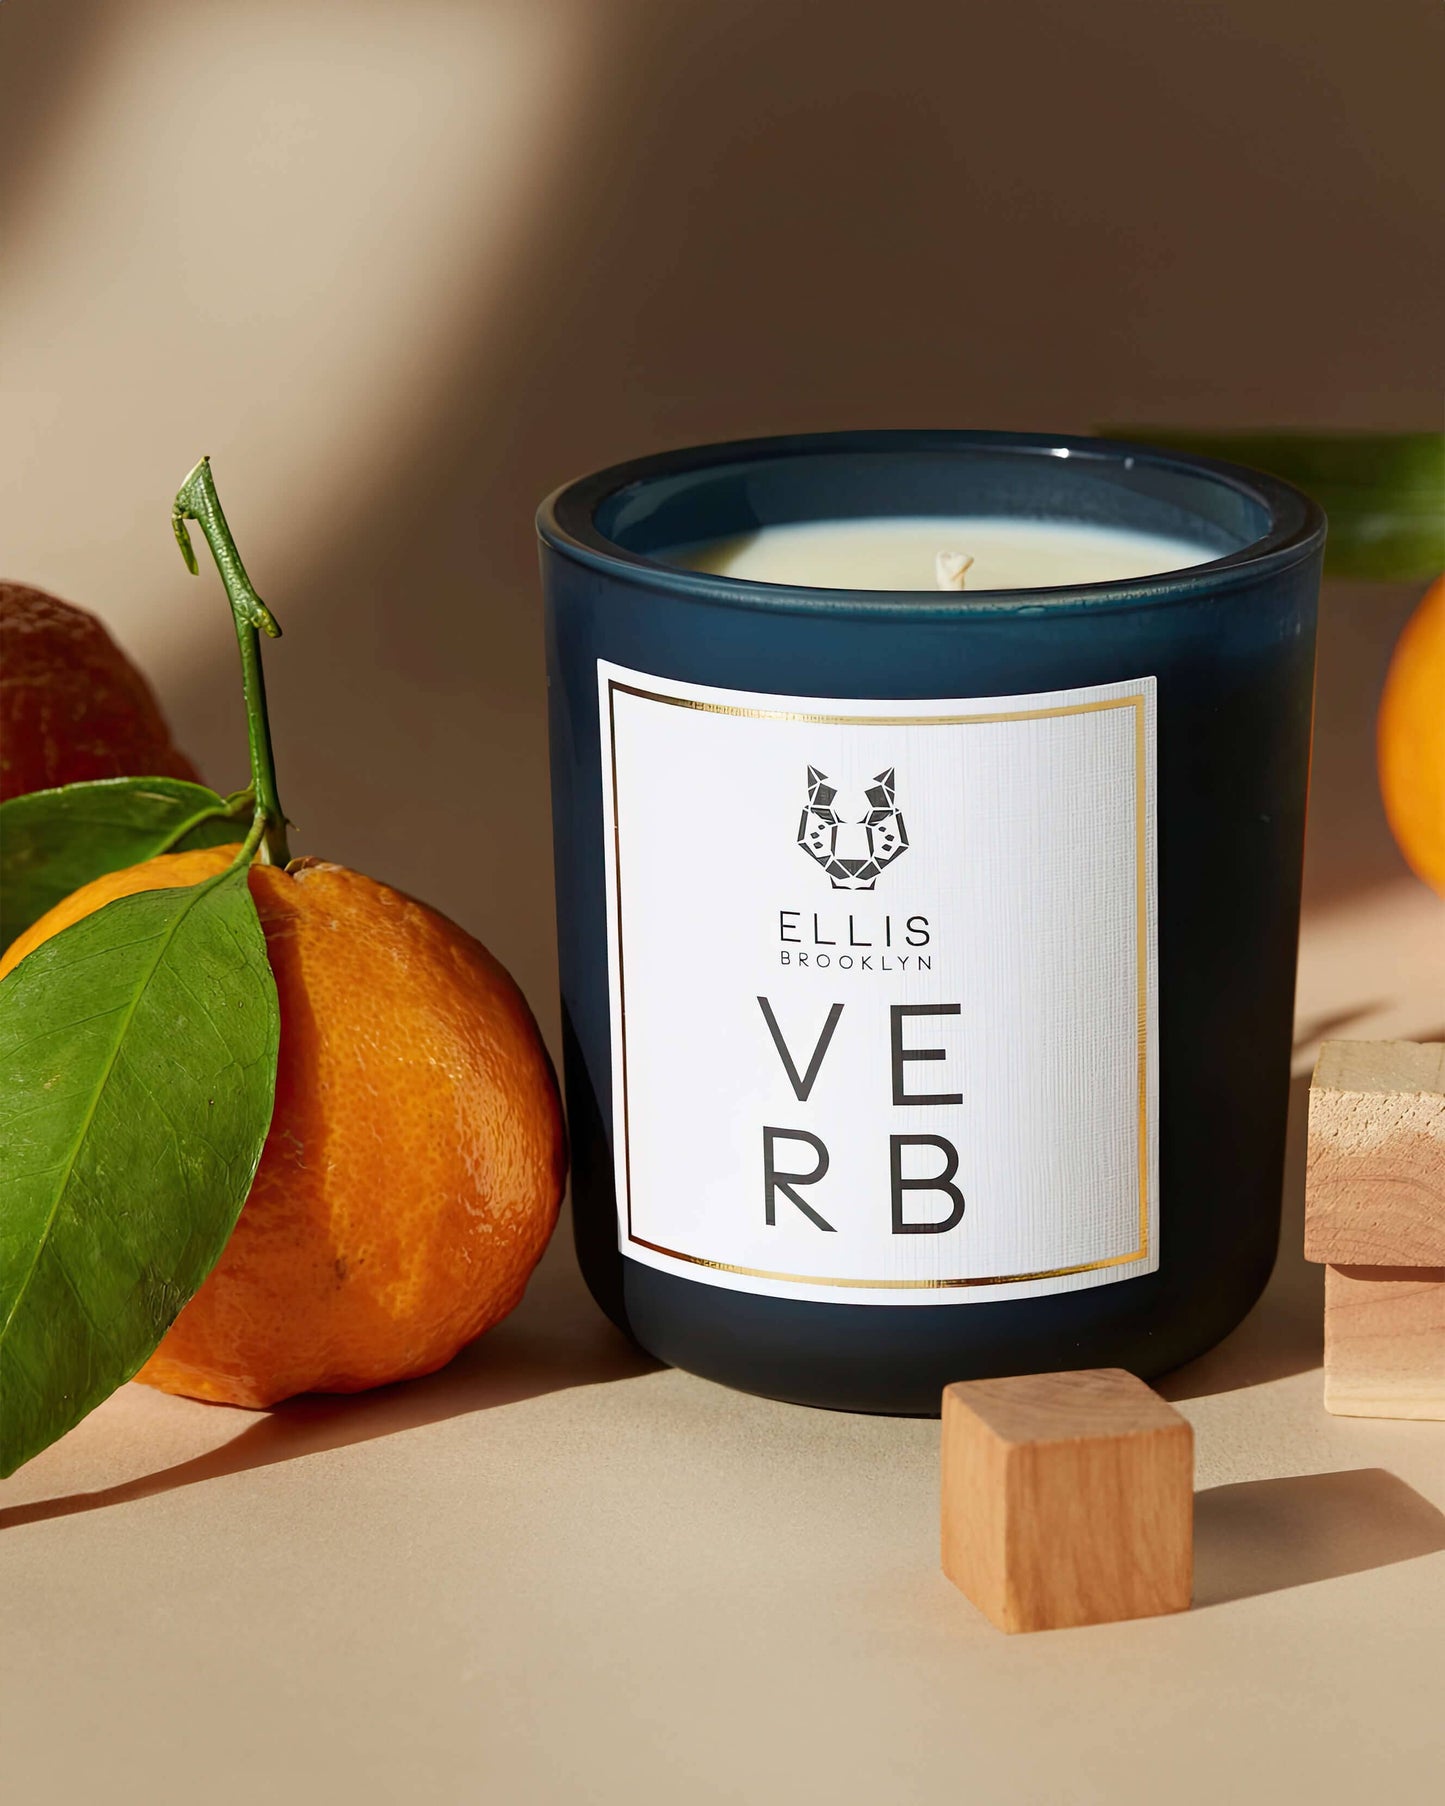 Terrific Scented Candle VERB